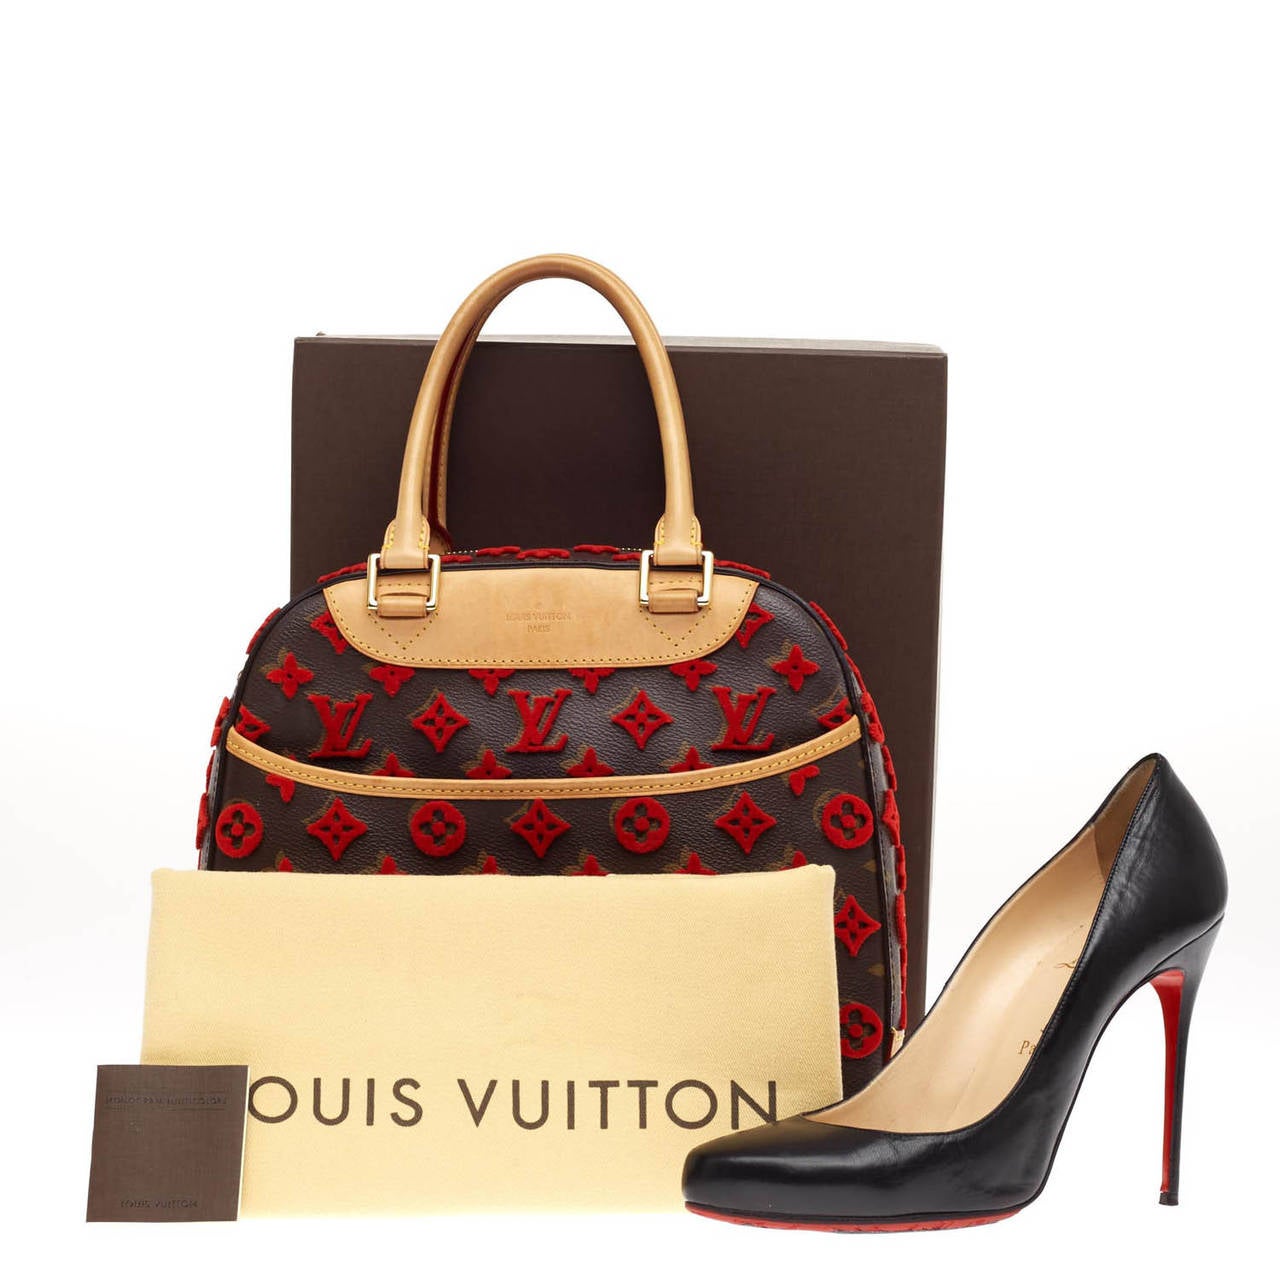 This authentic Louis Vuitton Deauville Cube Bag Limited Edition Monogram Canvas Tuffetage is a modern and unique twist on a timeless luxury brand. This limited edition tote from the Pre-Fall 2013 season is constructed of classic Louis Vuitton